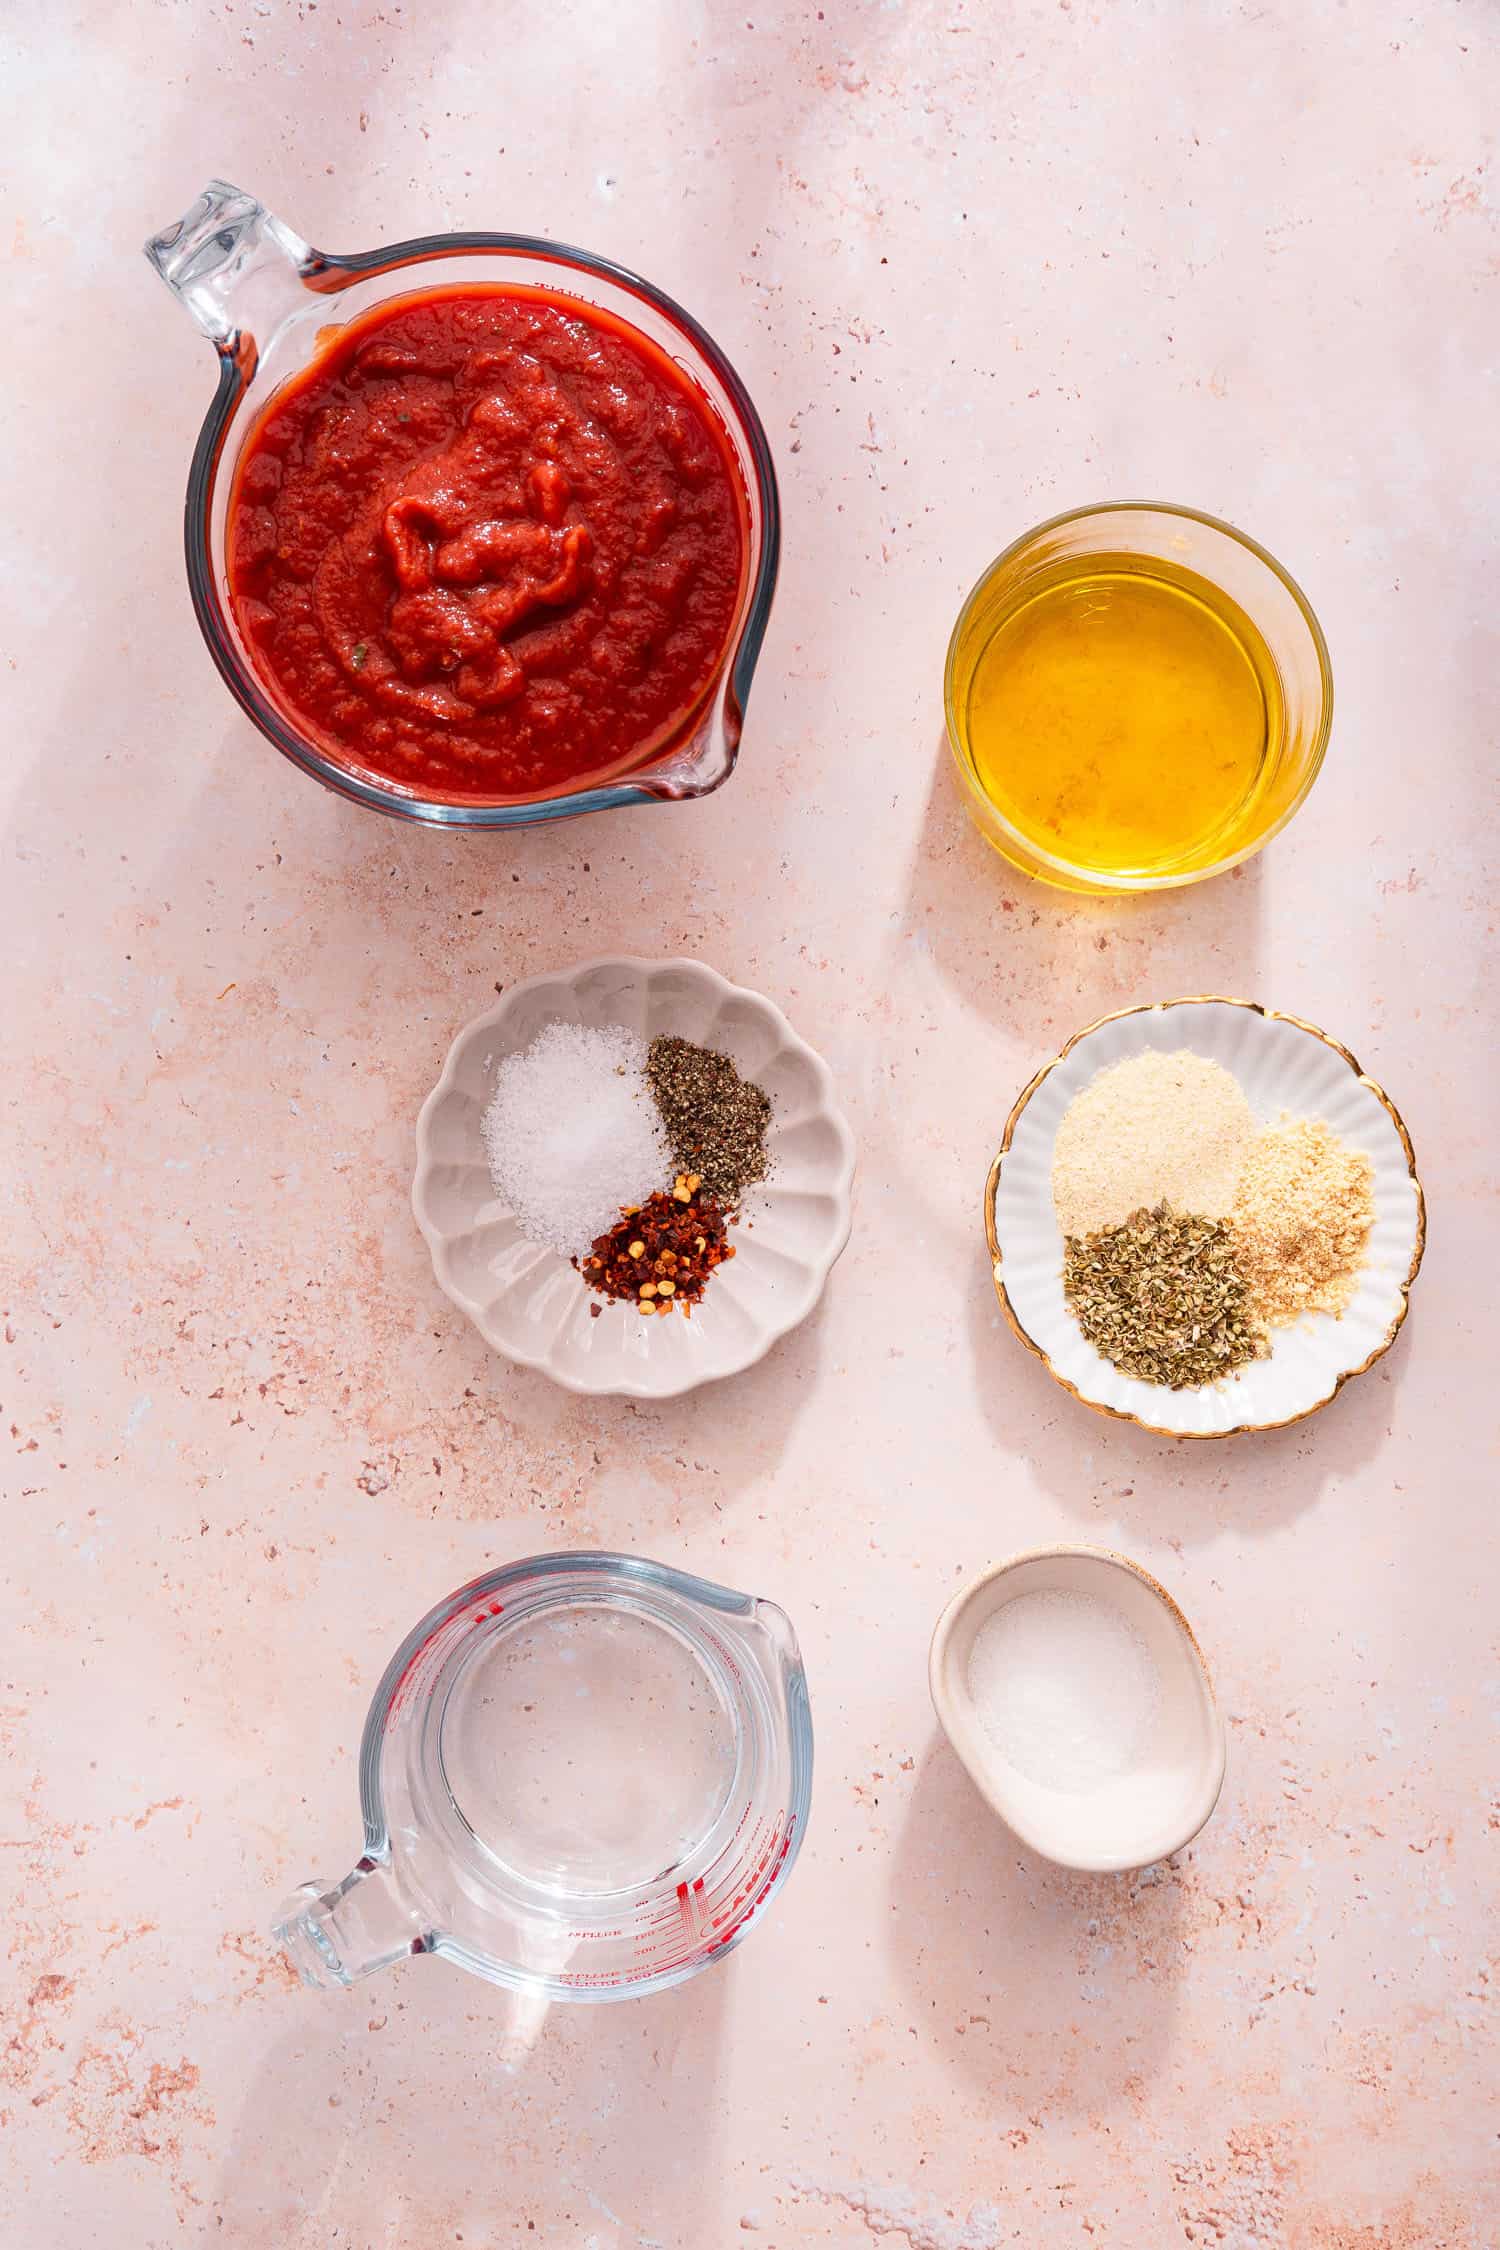 pizza sauce ingredients in bowls ready to mix